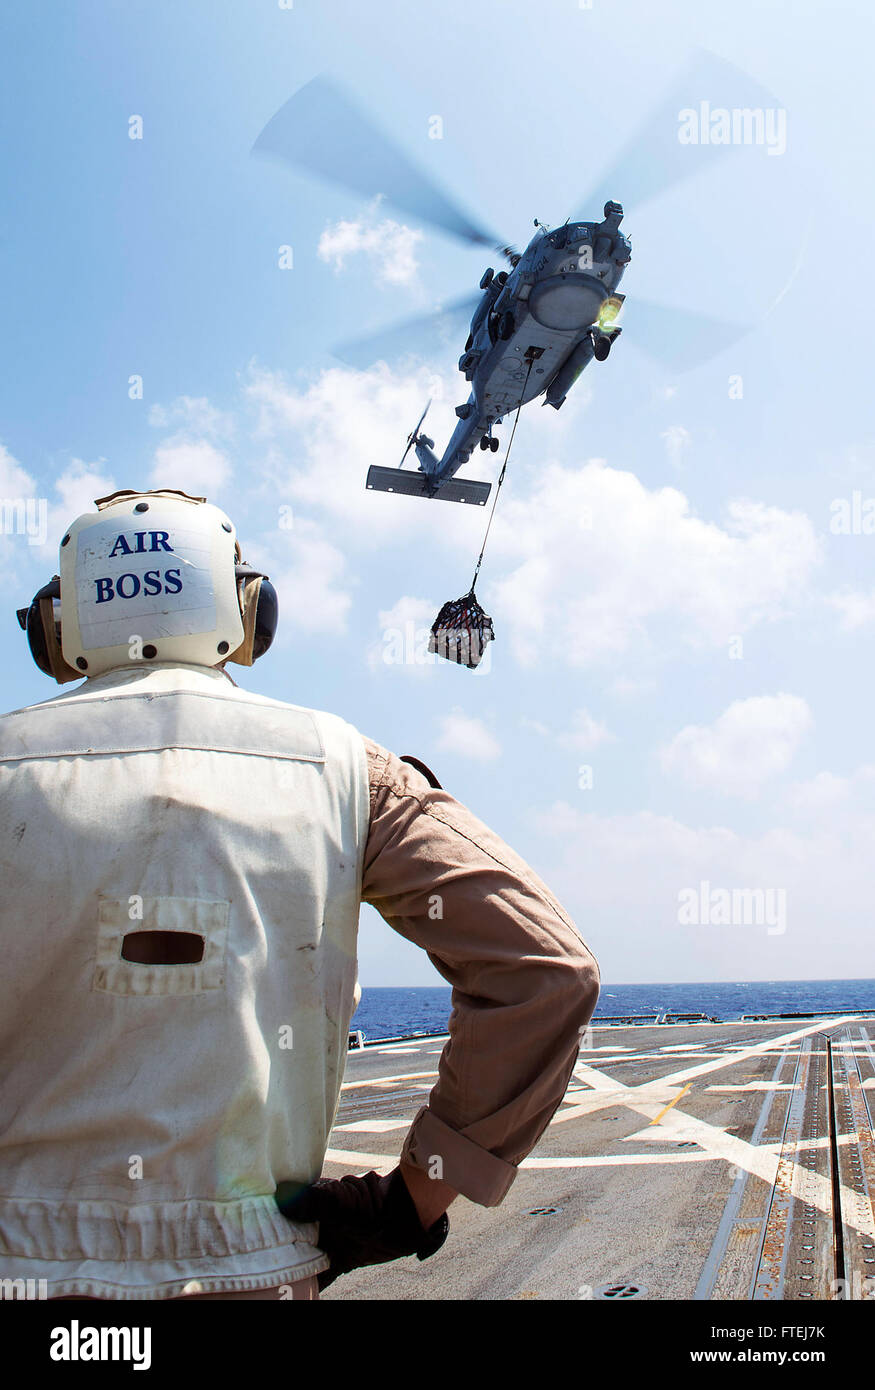 MEDITERRANEAN SEA (Aug 18, 2013) Ð Lt. Cmdr. John Nadder, Air Boss, from Richmond, Va., watches as a SH-60 R Seahawk prepares to drop supplies during a vertical replenishment-at-sea (VERTREP) with Military Sealift Command oiler USNS Leroy Grumman (T-AO 195) aboard the guided missile destroyer USS Gravely (DDG 107). Gravely, homeported in Norfolk, Va., is on a scheduled deployment supporting maritime security operations and theater security cooperation efforts in the 6th Fleet area of responsibility. Stock Photo